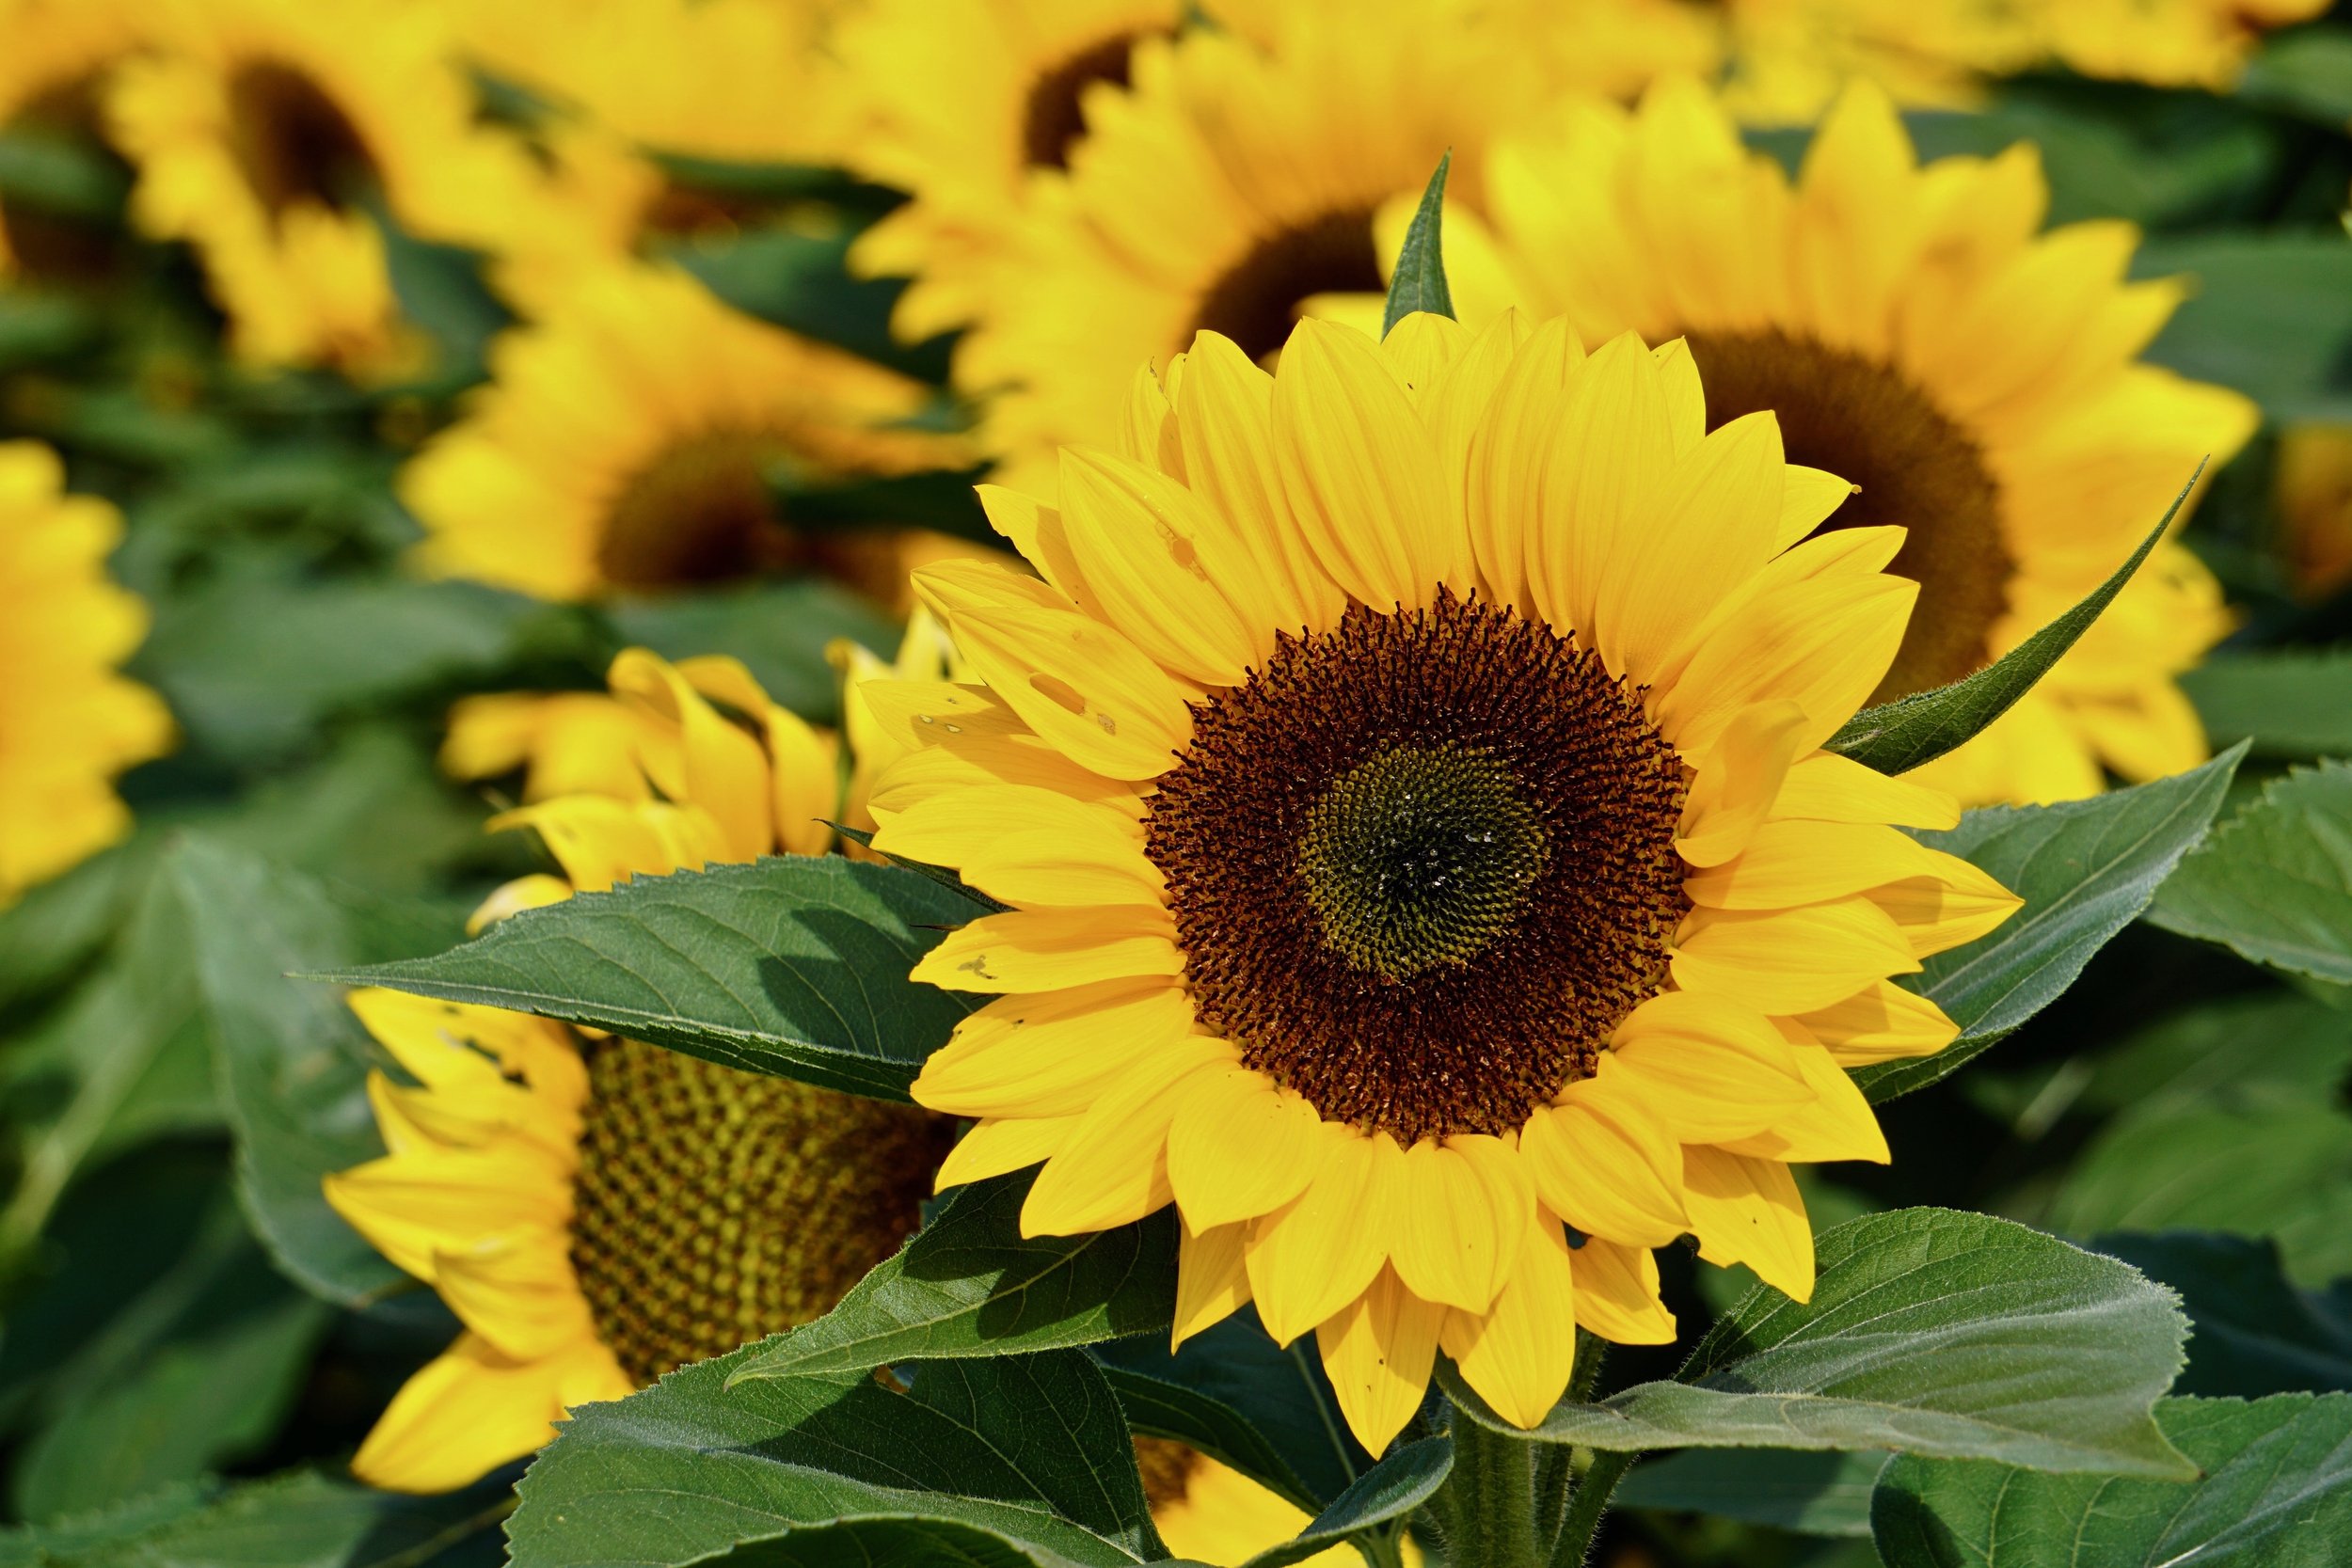 Smiling Sunflowers